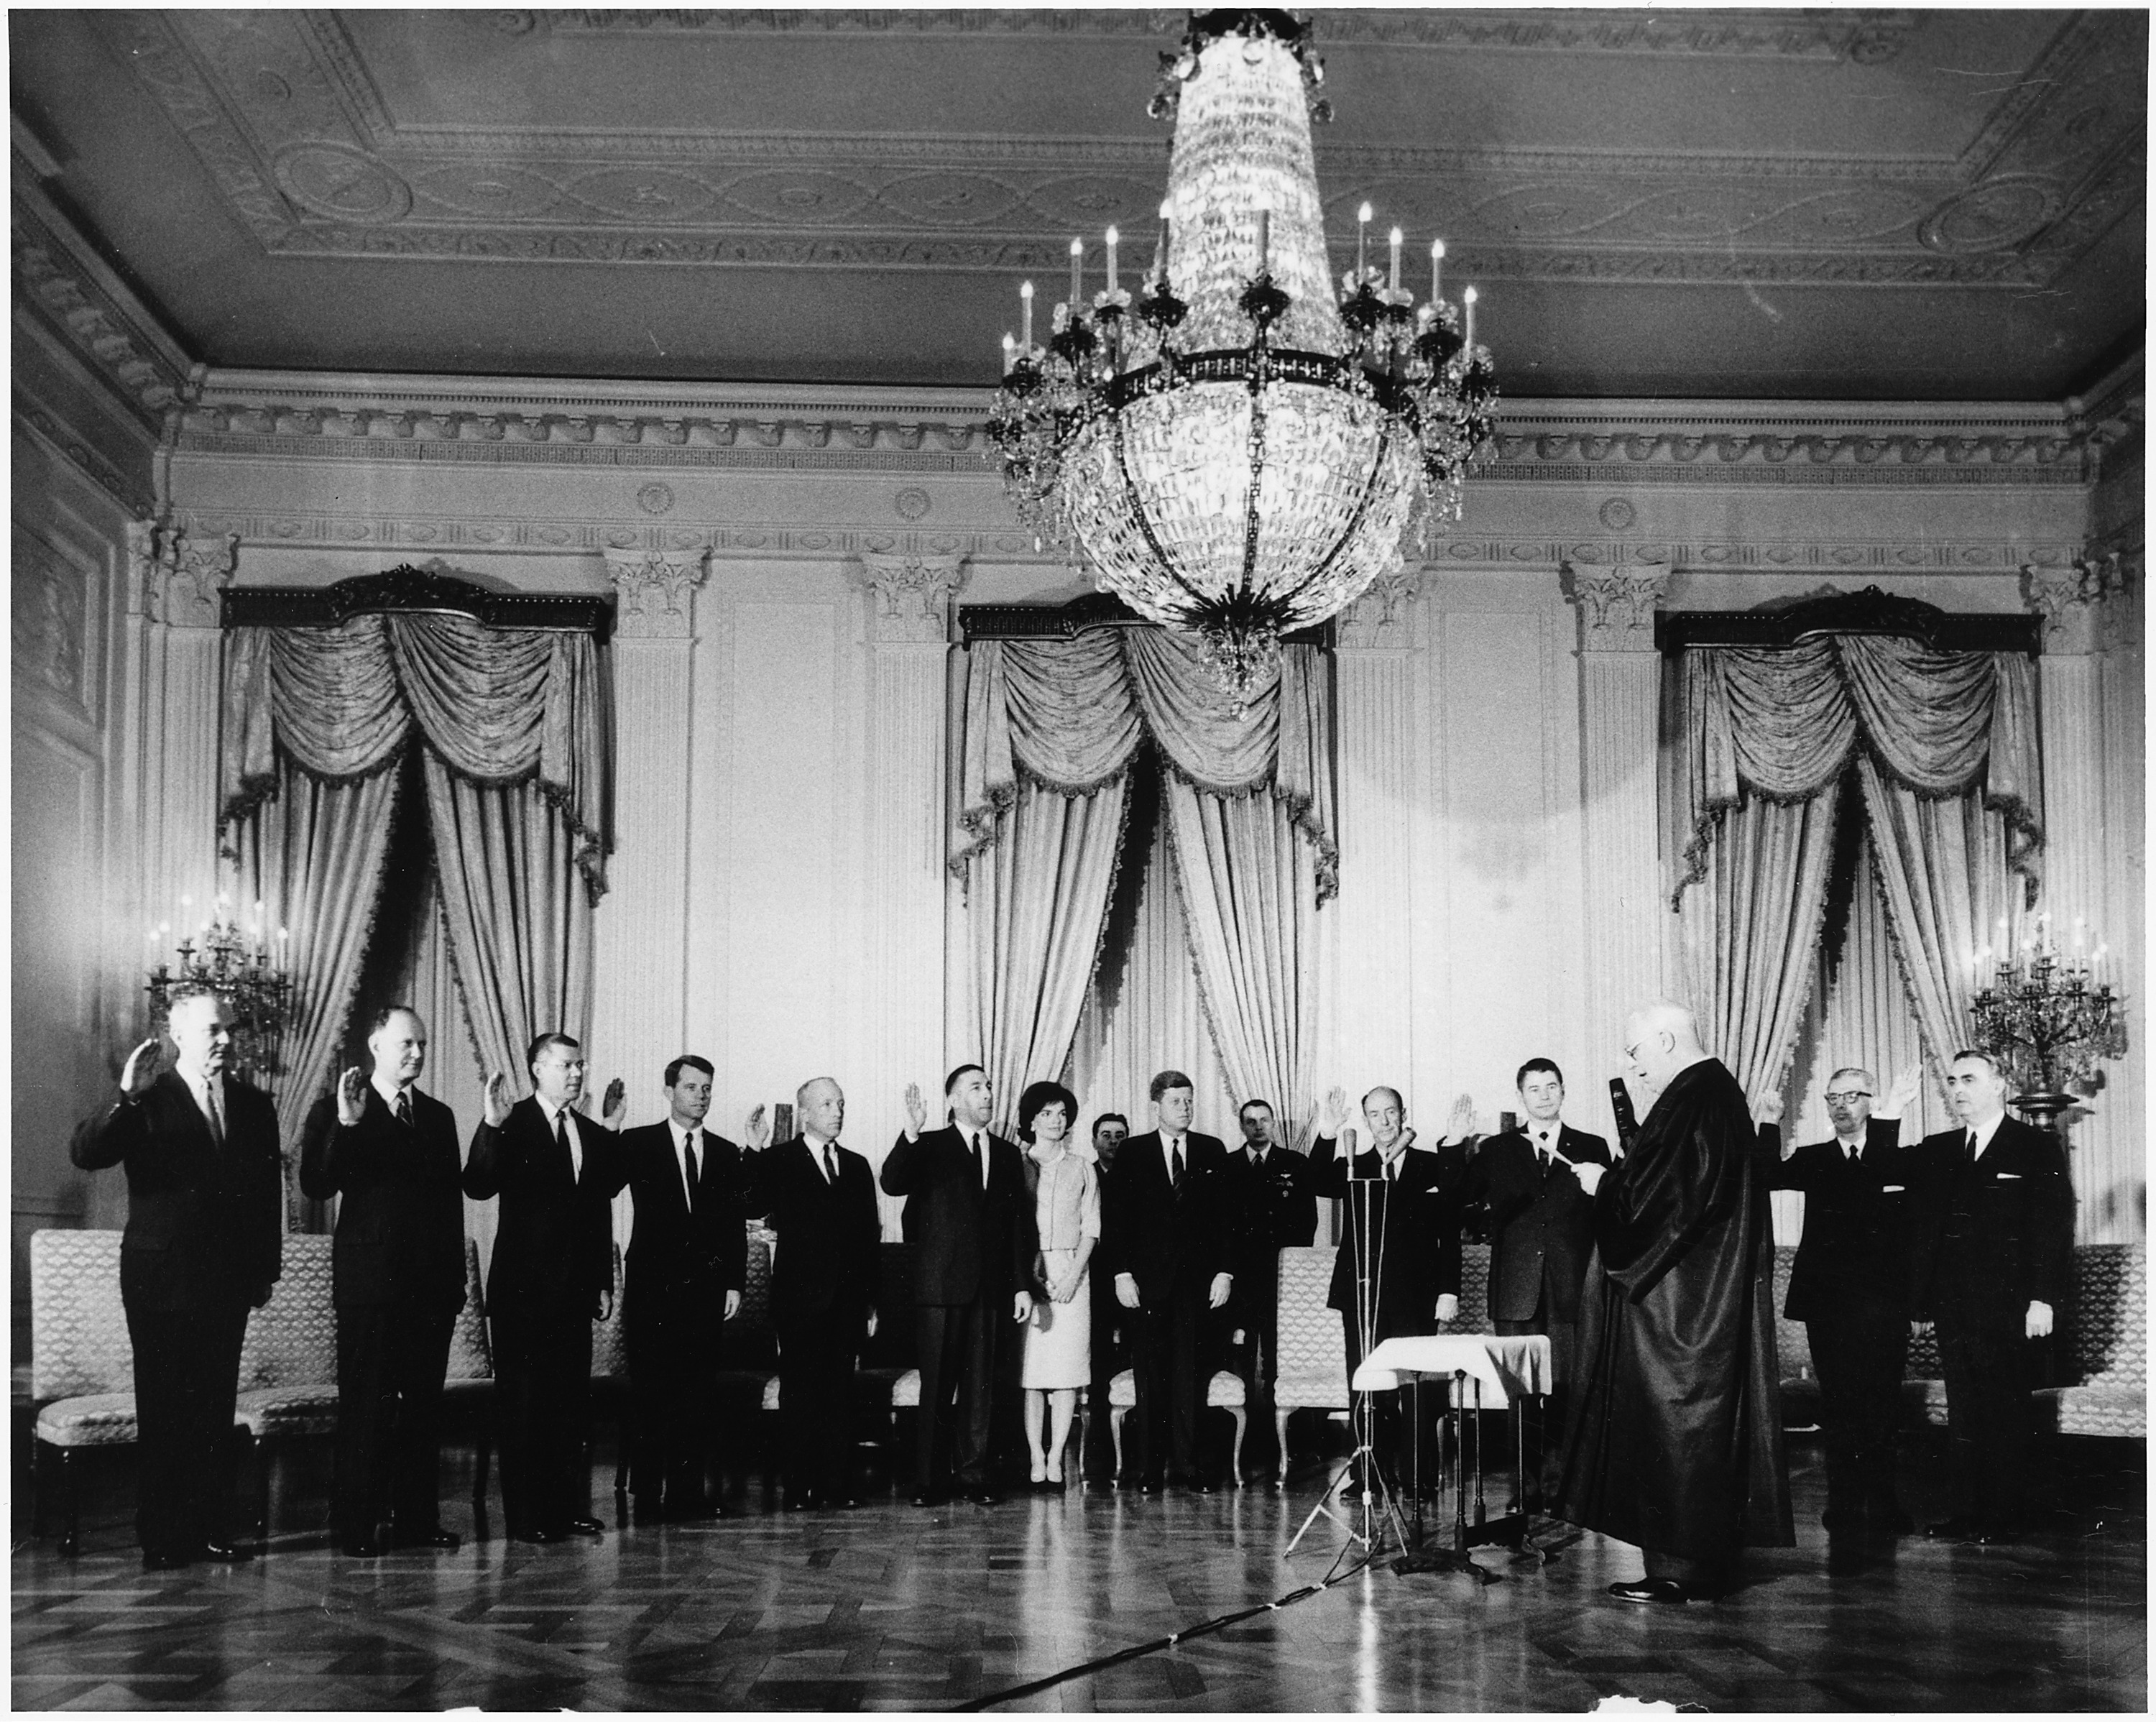 Swearing-In Ceremony of President Kennedy's Cabinet - NARA - 194172